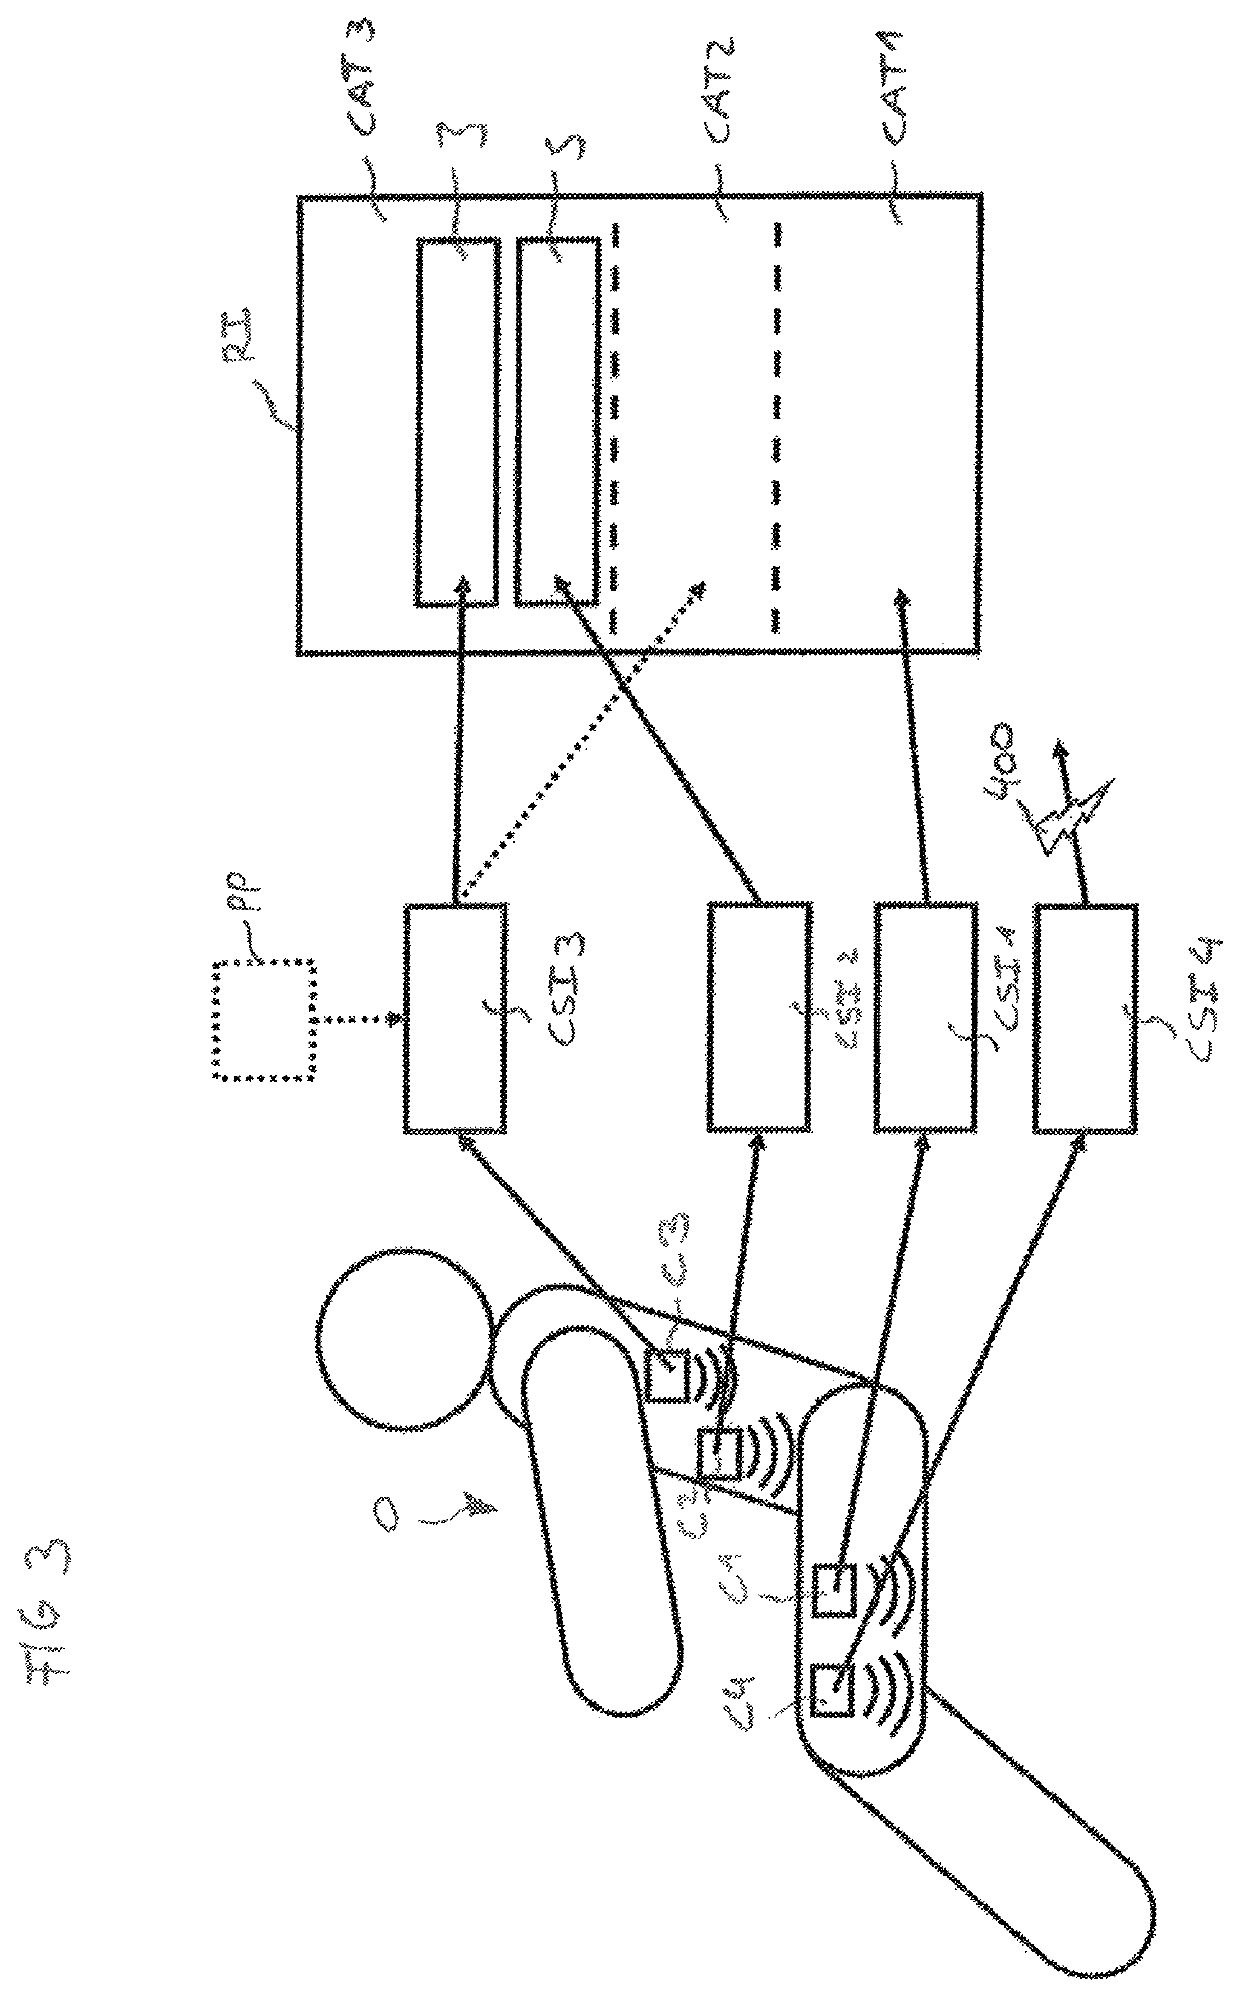 Method for adjusting a temperature of a seat